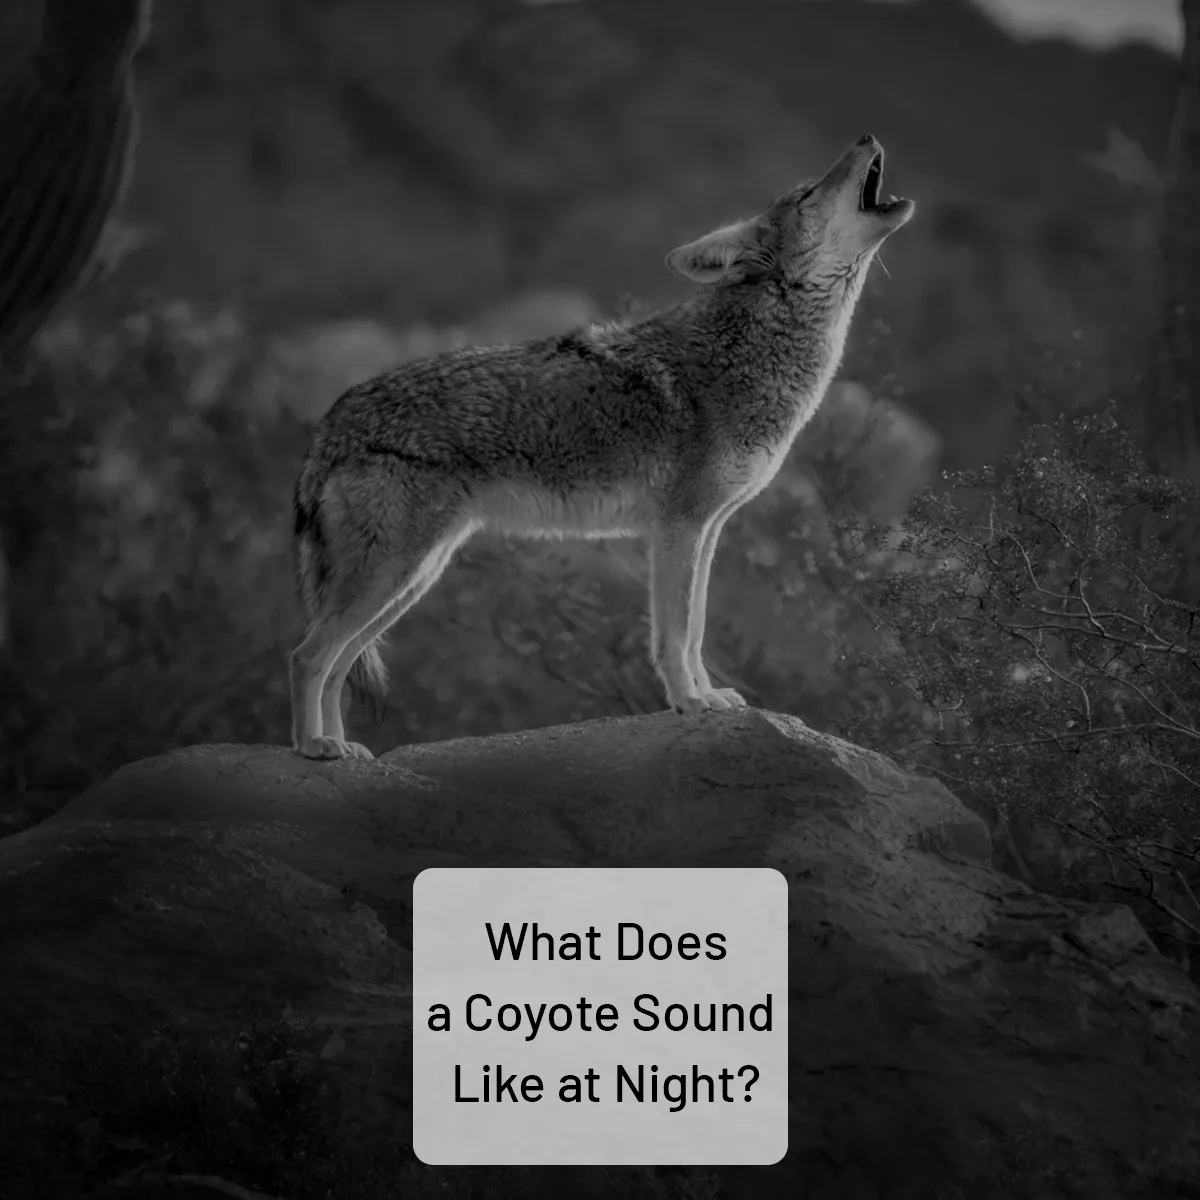 What does a coyote sound like at night?